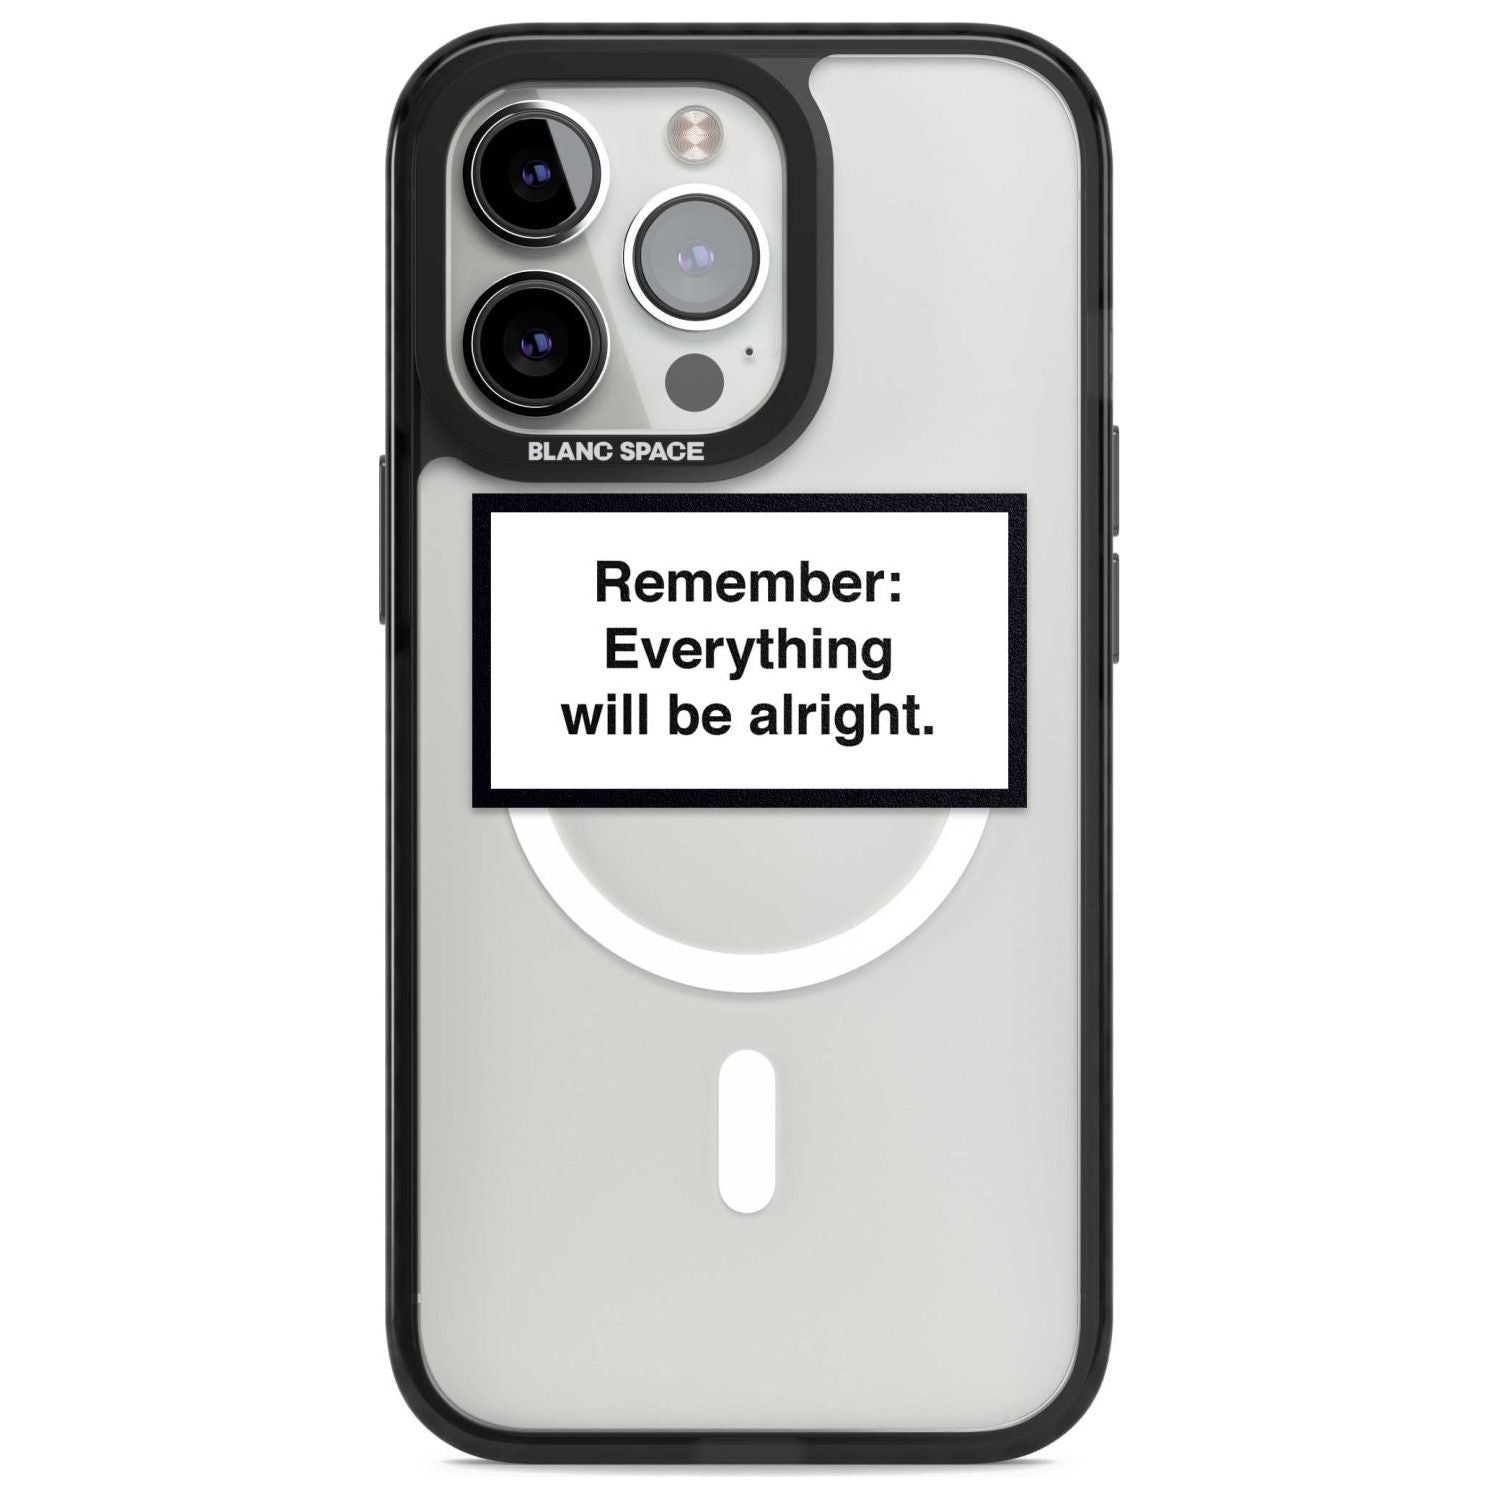 Everything Will Be Alright Phone Case iPhone 15 Pro Max / Magsafe Black Impact Case,iPhone 15 Pro / Magsafe Black Impact Case,iPhone 14 Pro Max / Magsafe Black Impact Case,iPhone 14 Pro / Magsafe Black Impact Case,iPhone 13 Pro / Magsafe Black Impact Case Blanc Space